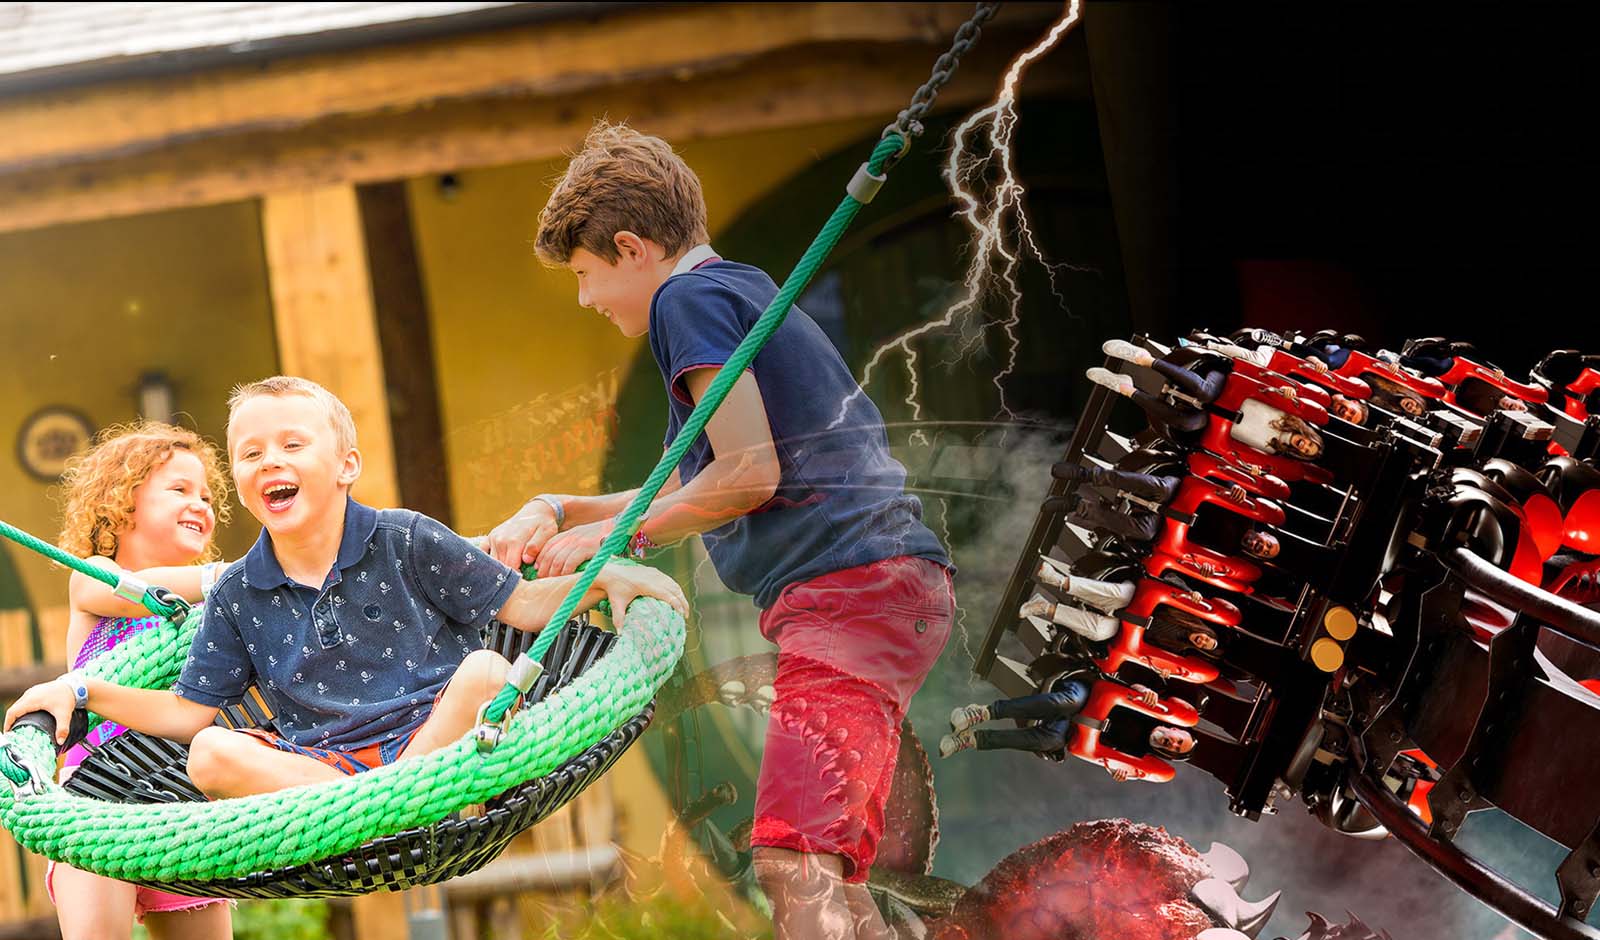 Book a Short Break and Enjoy the 2nd Day at Alton Towers for Free!